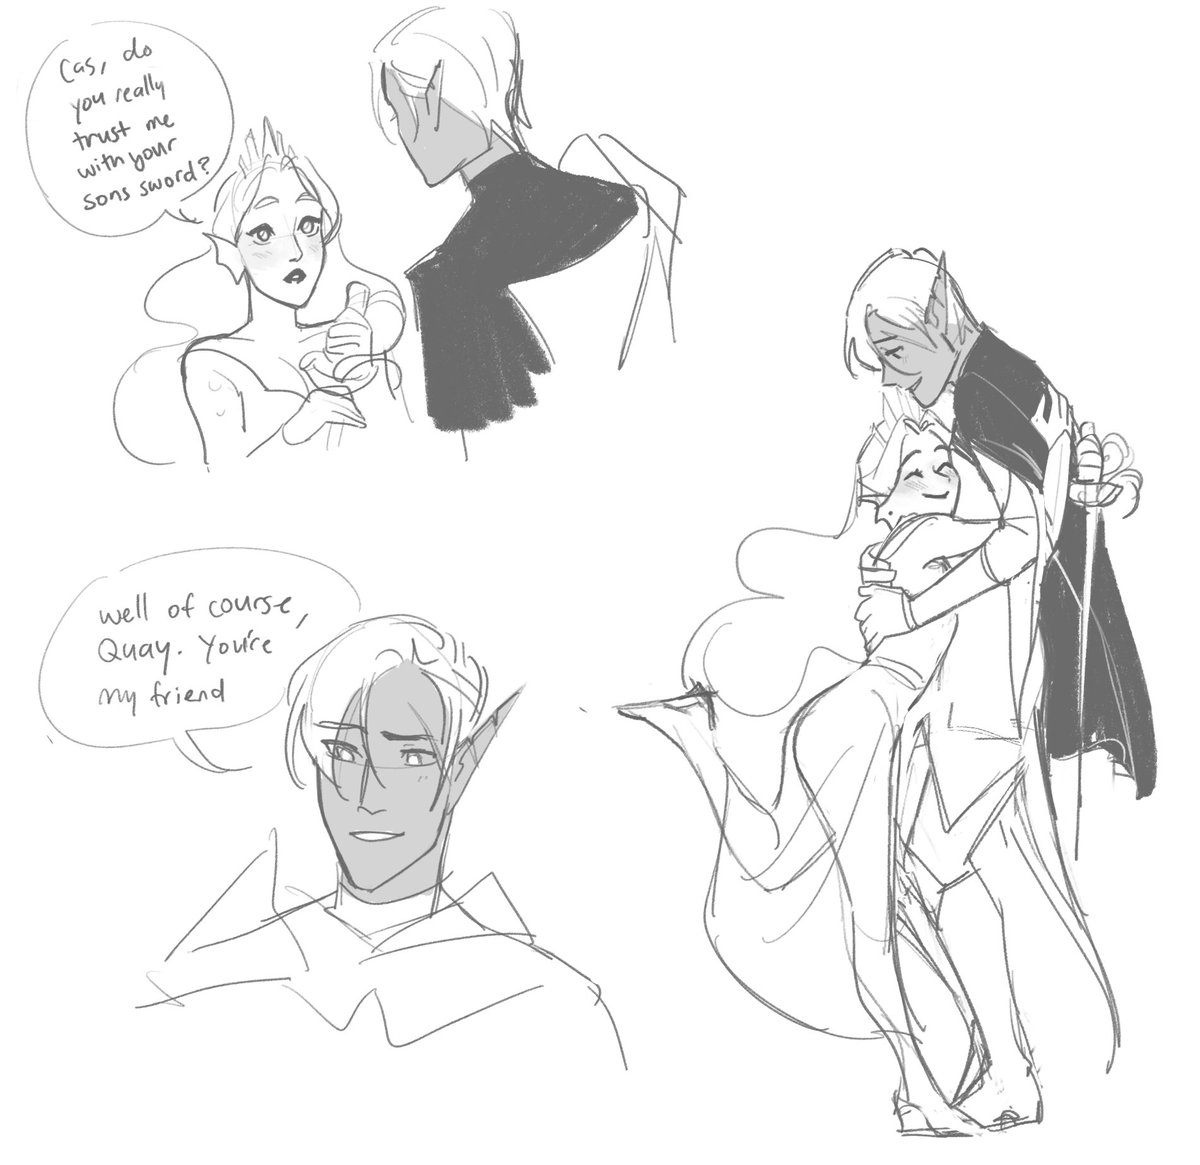 Our cleric quay (@emmamsketches) gives cas sweet hugs and it gives me life TT 
I lov dnd fwiends 